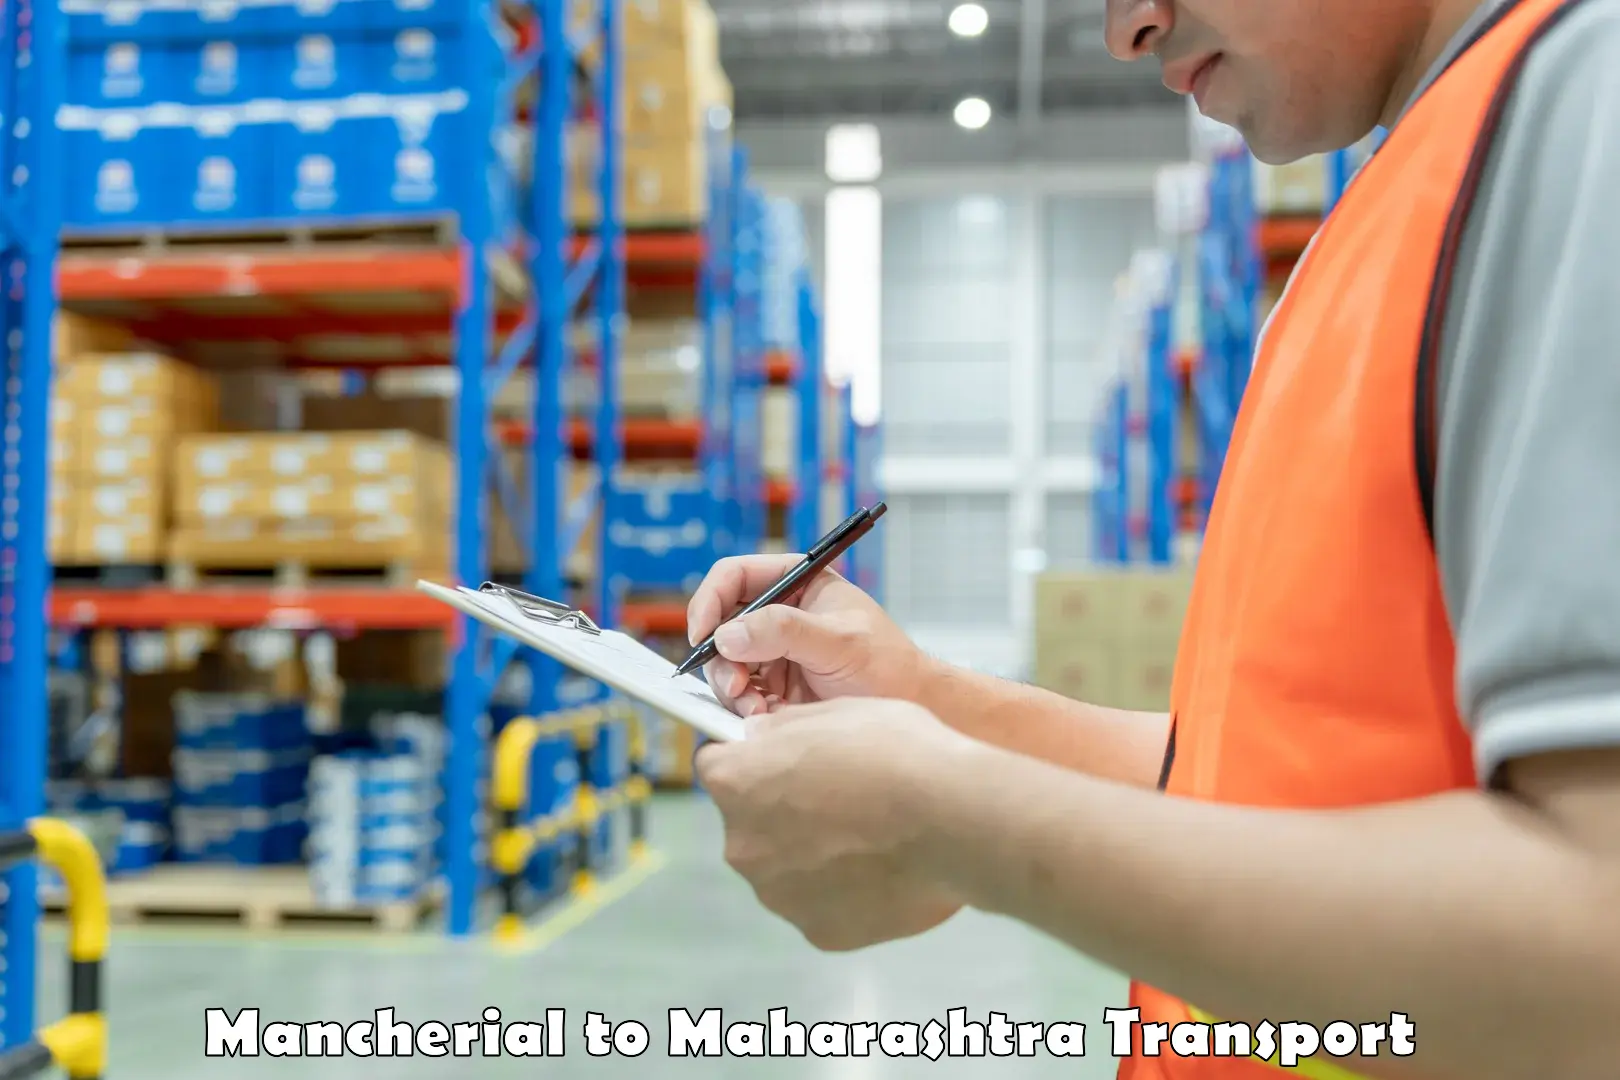 Air freight transport services in Mancherial to Ahmednagar